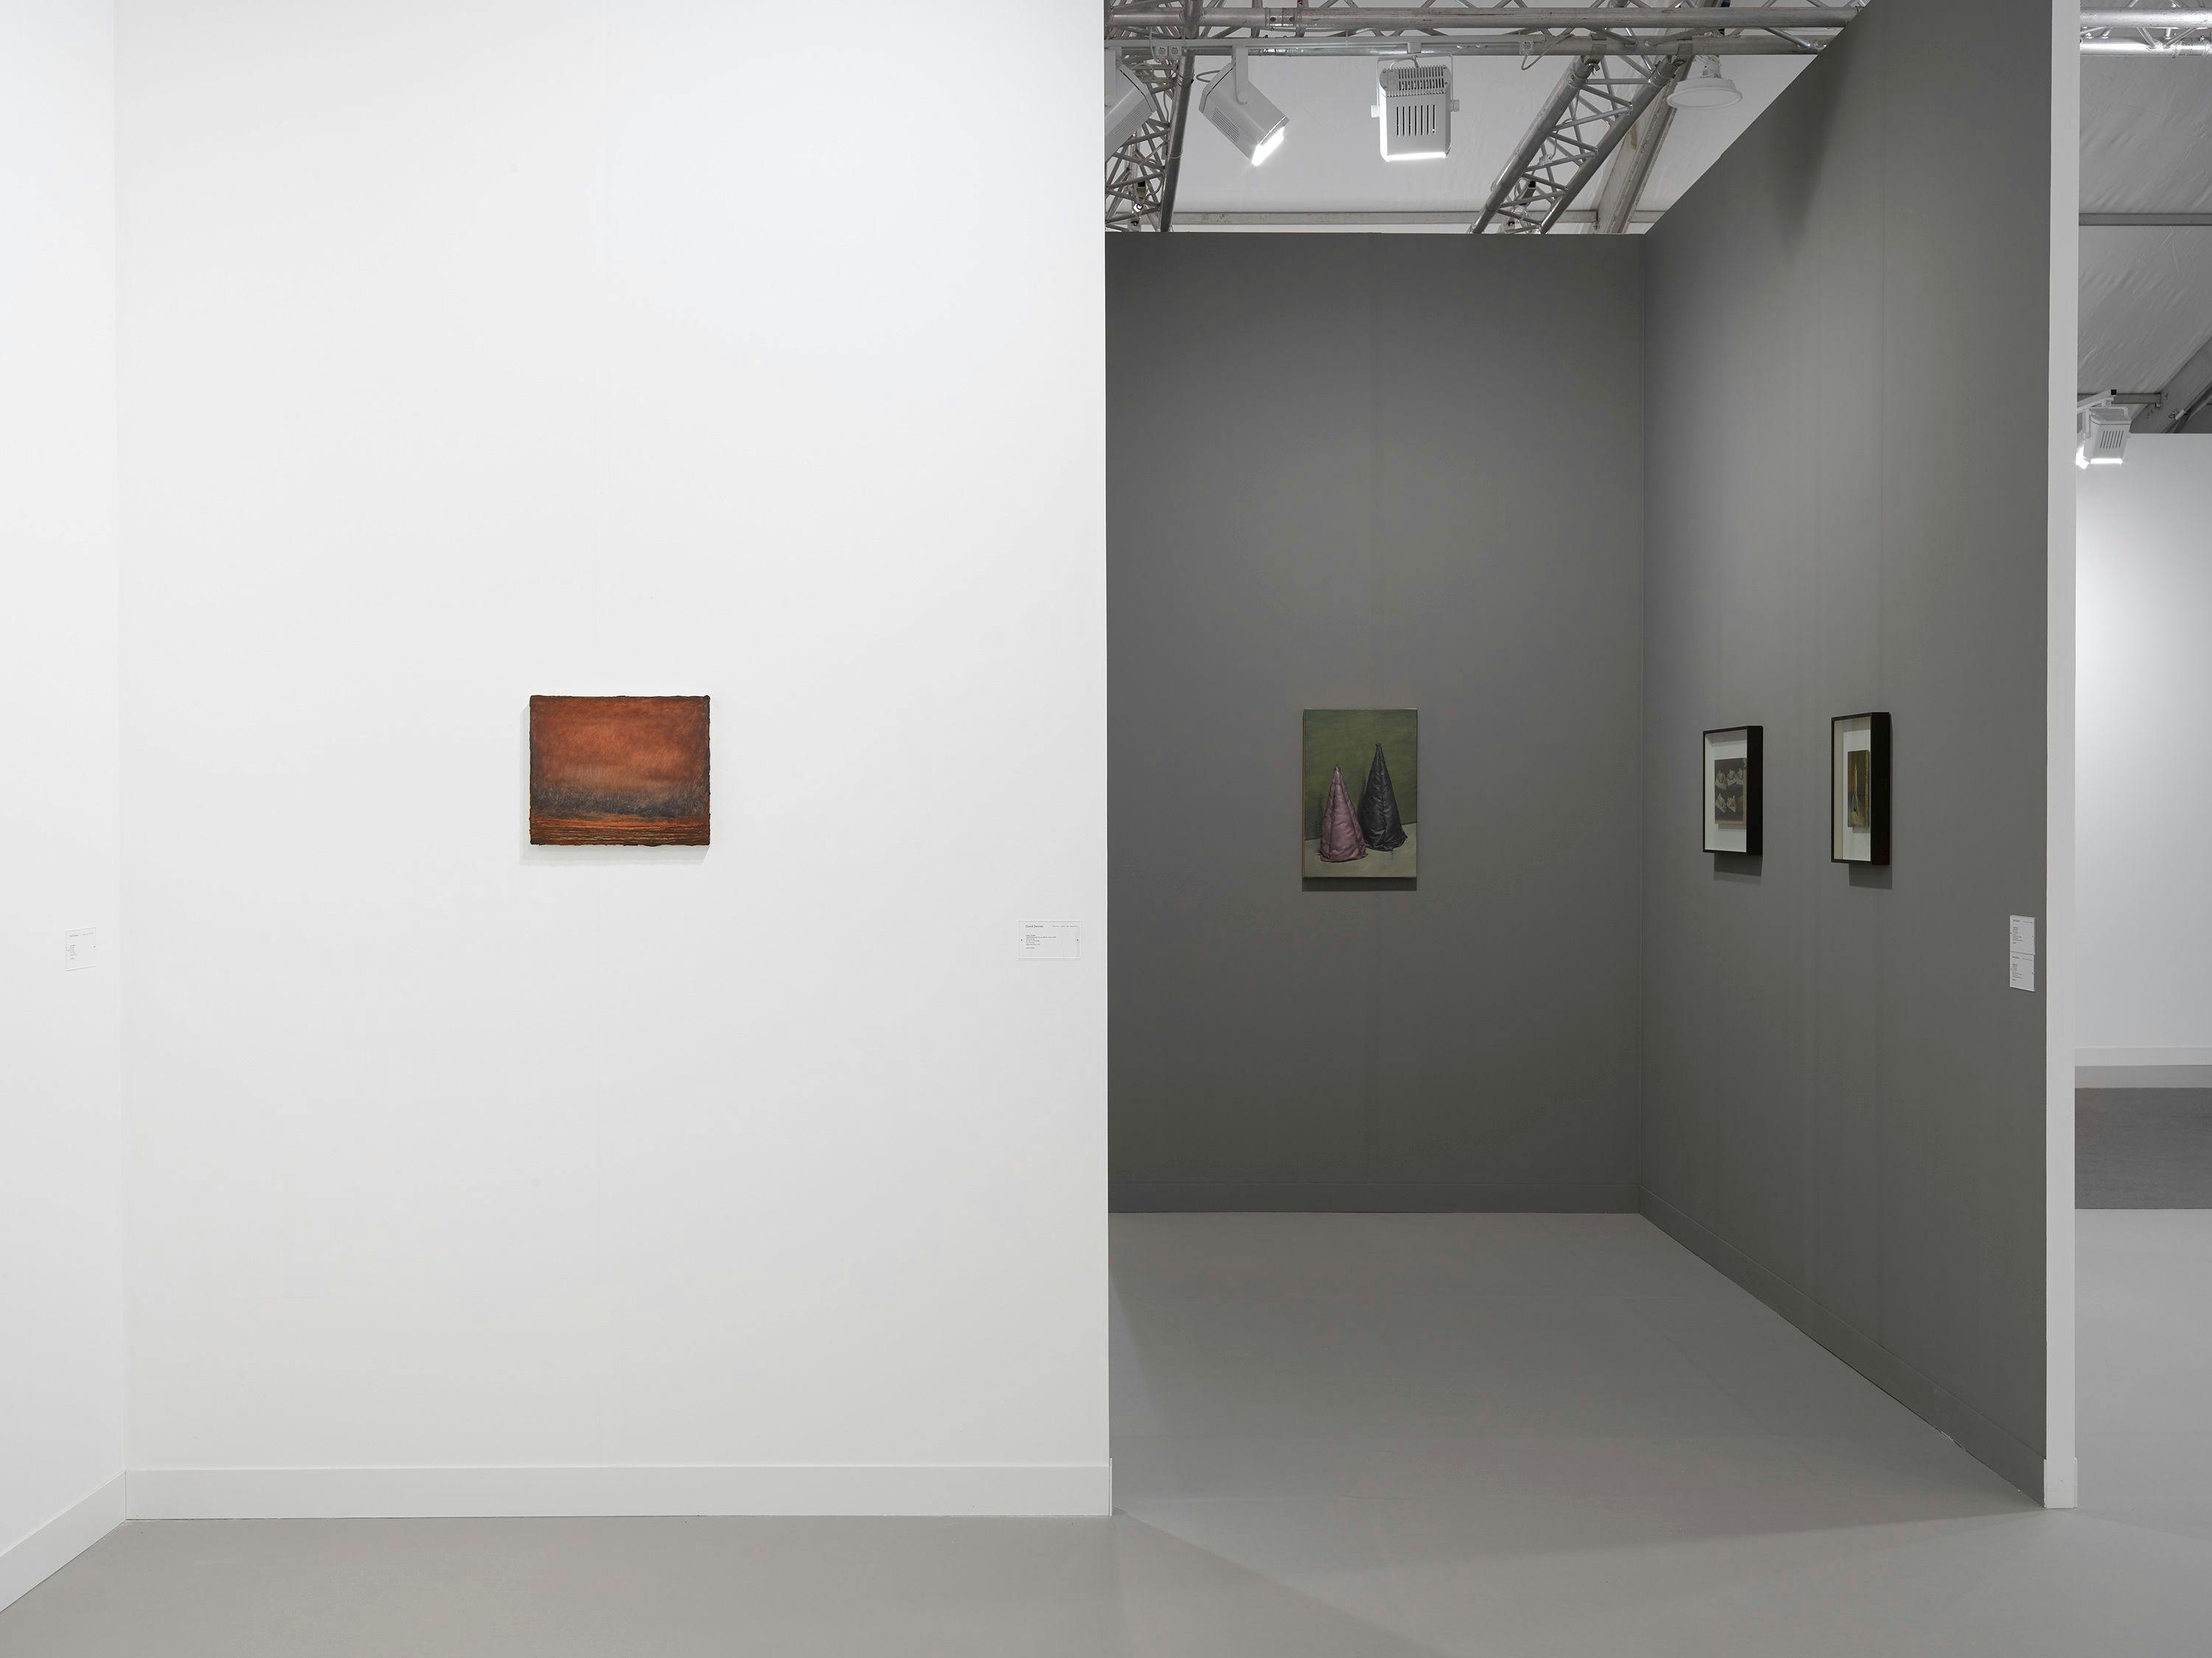 An installation view of David Zwirner gallery’s booth at Frieze London, dated 2021.